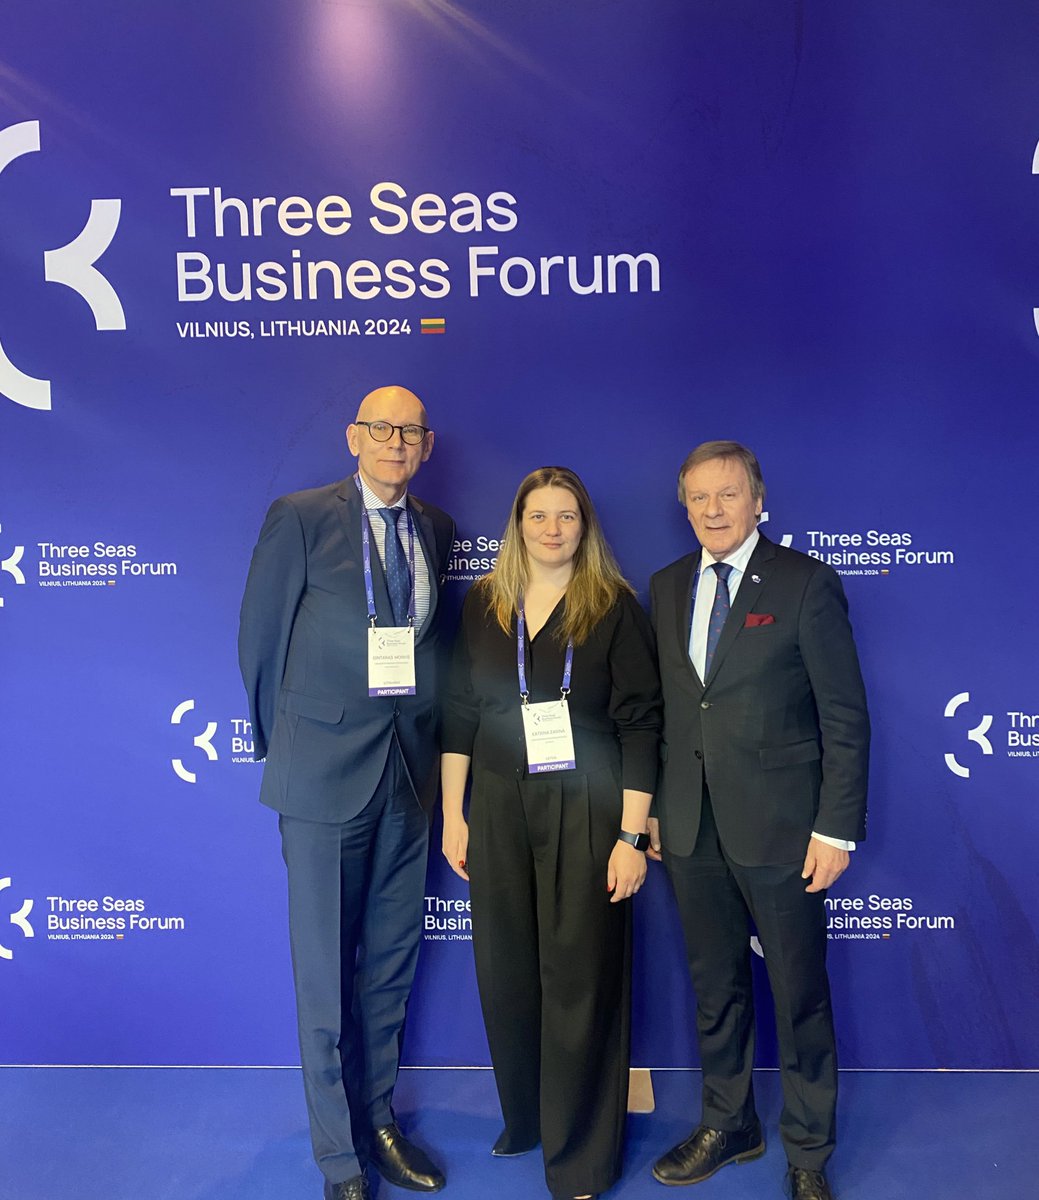 The @3seaseu Summit & Business Forum unites also members of @employers_EESC . Nice to meet and discuss regional cooperation for economic growth close to home! #3Seas #LTRK